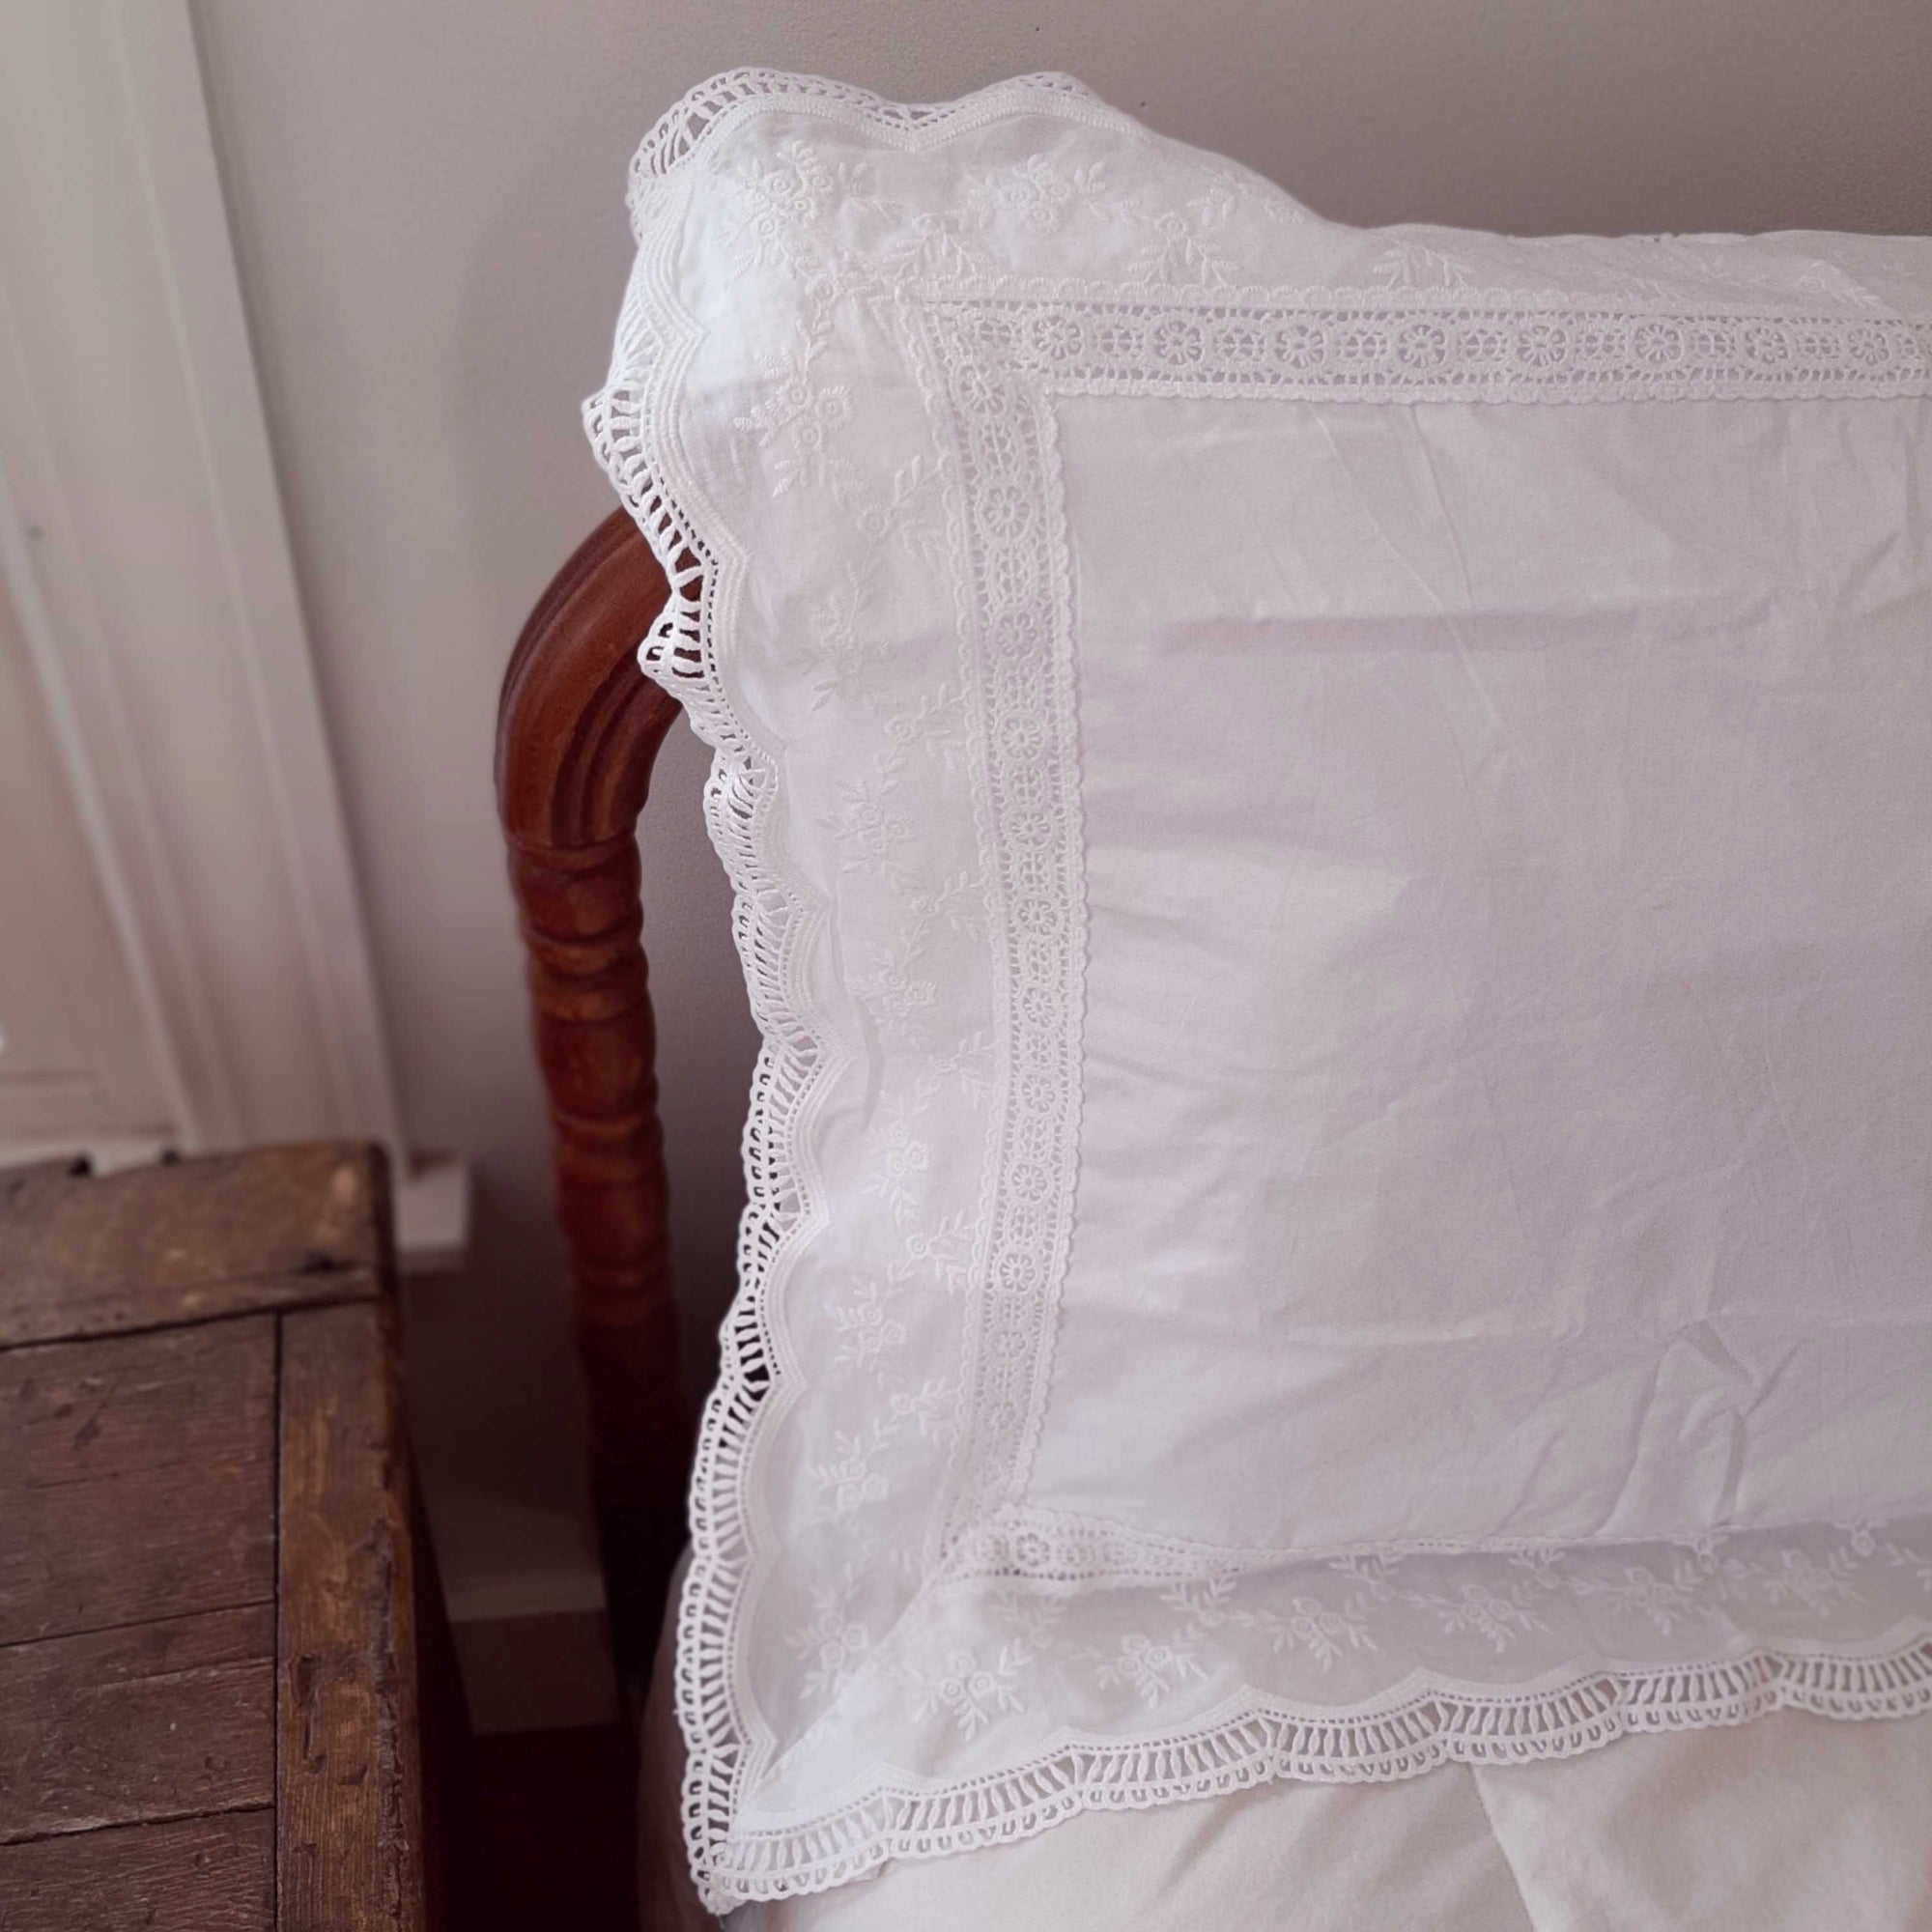 Our Embroidery and Lace Pillow Sham lends a sweet cottage style and create instant vintage charm. This crisp-white sham  features beautiful edging all around with detailed lace and delicate embroidered flowers. This lace edge sham will add texture and a charming vintage look to your room.  Made with 100% cotton, our Embroidery and Lace Pillow Sham has a vintage cotton quality that is soft and breathable without static cling.